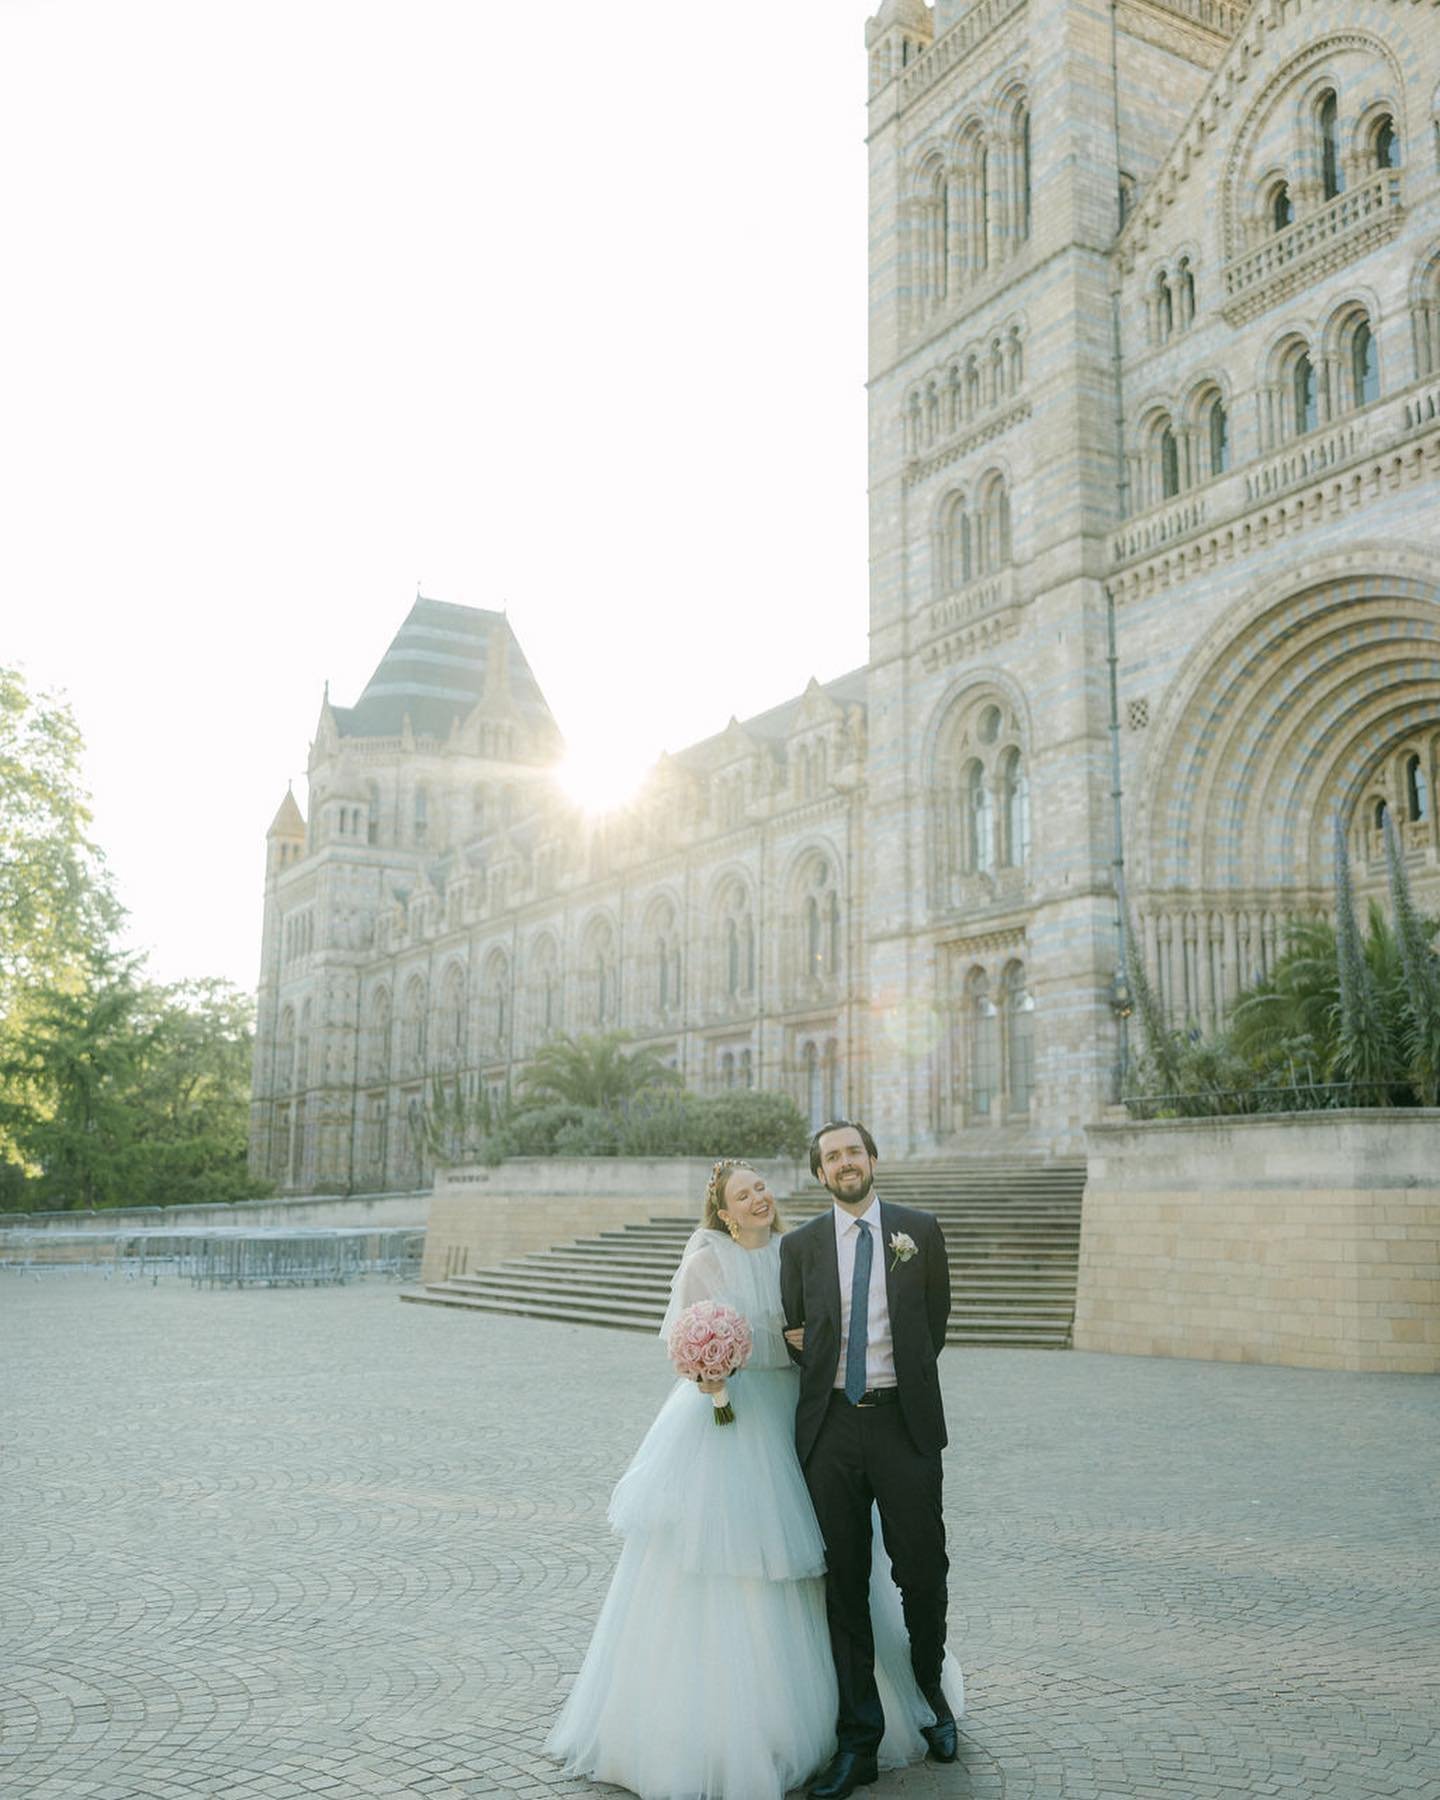 NATURAL HISTORY MUSEUM // Still one of my favourite shots by the talented @hollyclarkphotography of A + T at the @nhm_venuehire 

Such an iconic wedding and events space in the heart of London 

Super proud to be recommended by the team at NHM as one